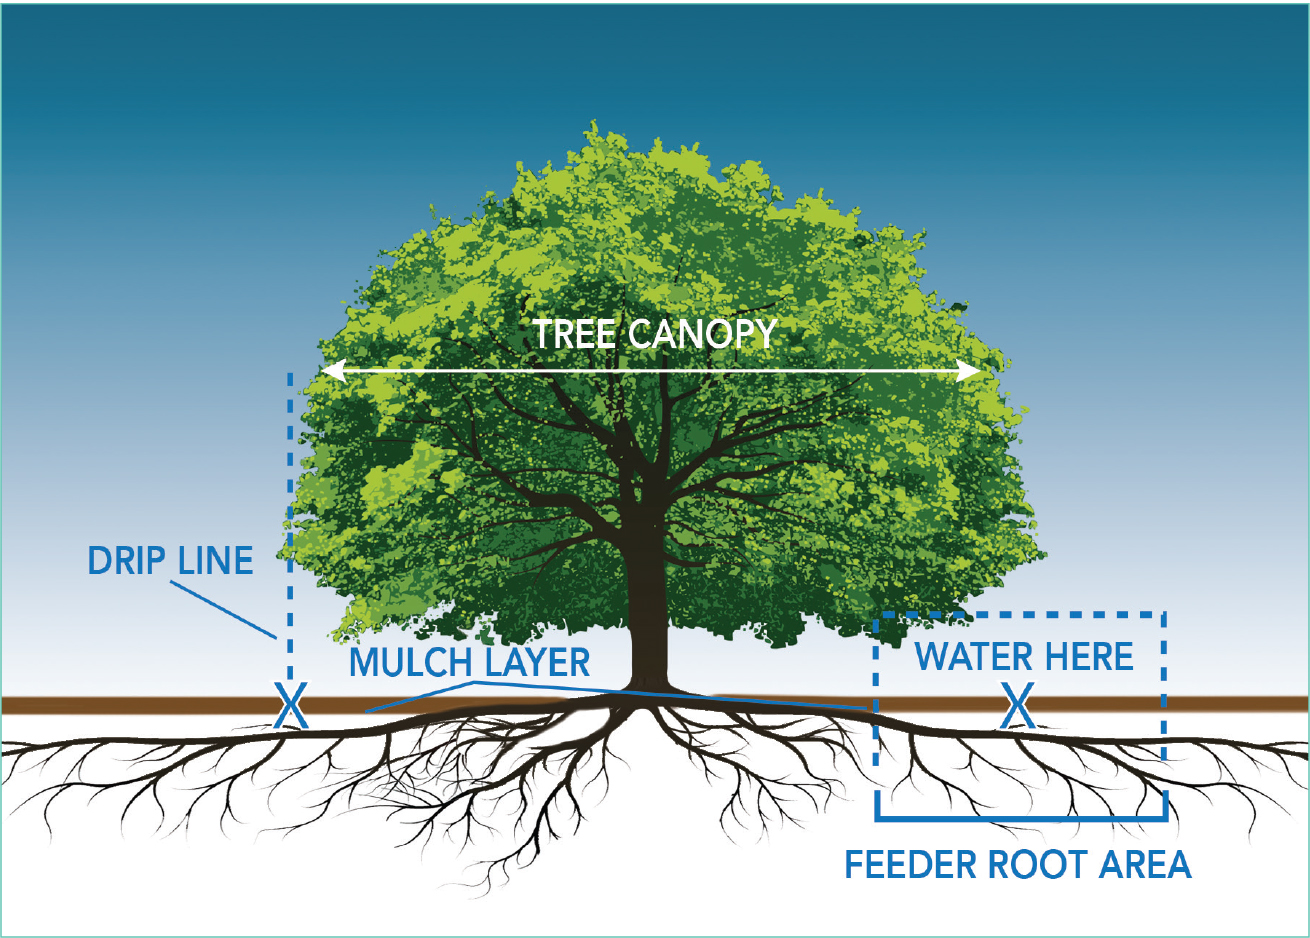 A 3-week dry
spell means
Trees: Need about
10 gallons of water for each inch of the tree trunk’s diameter.
Shrubs: Need between 5 and 18 gallons of water. Image credit: Denver Water.